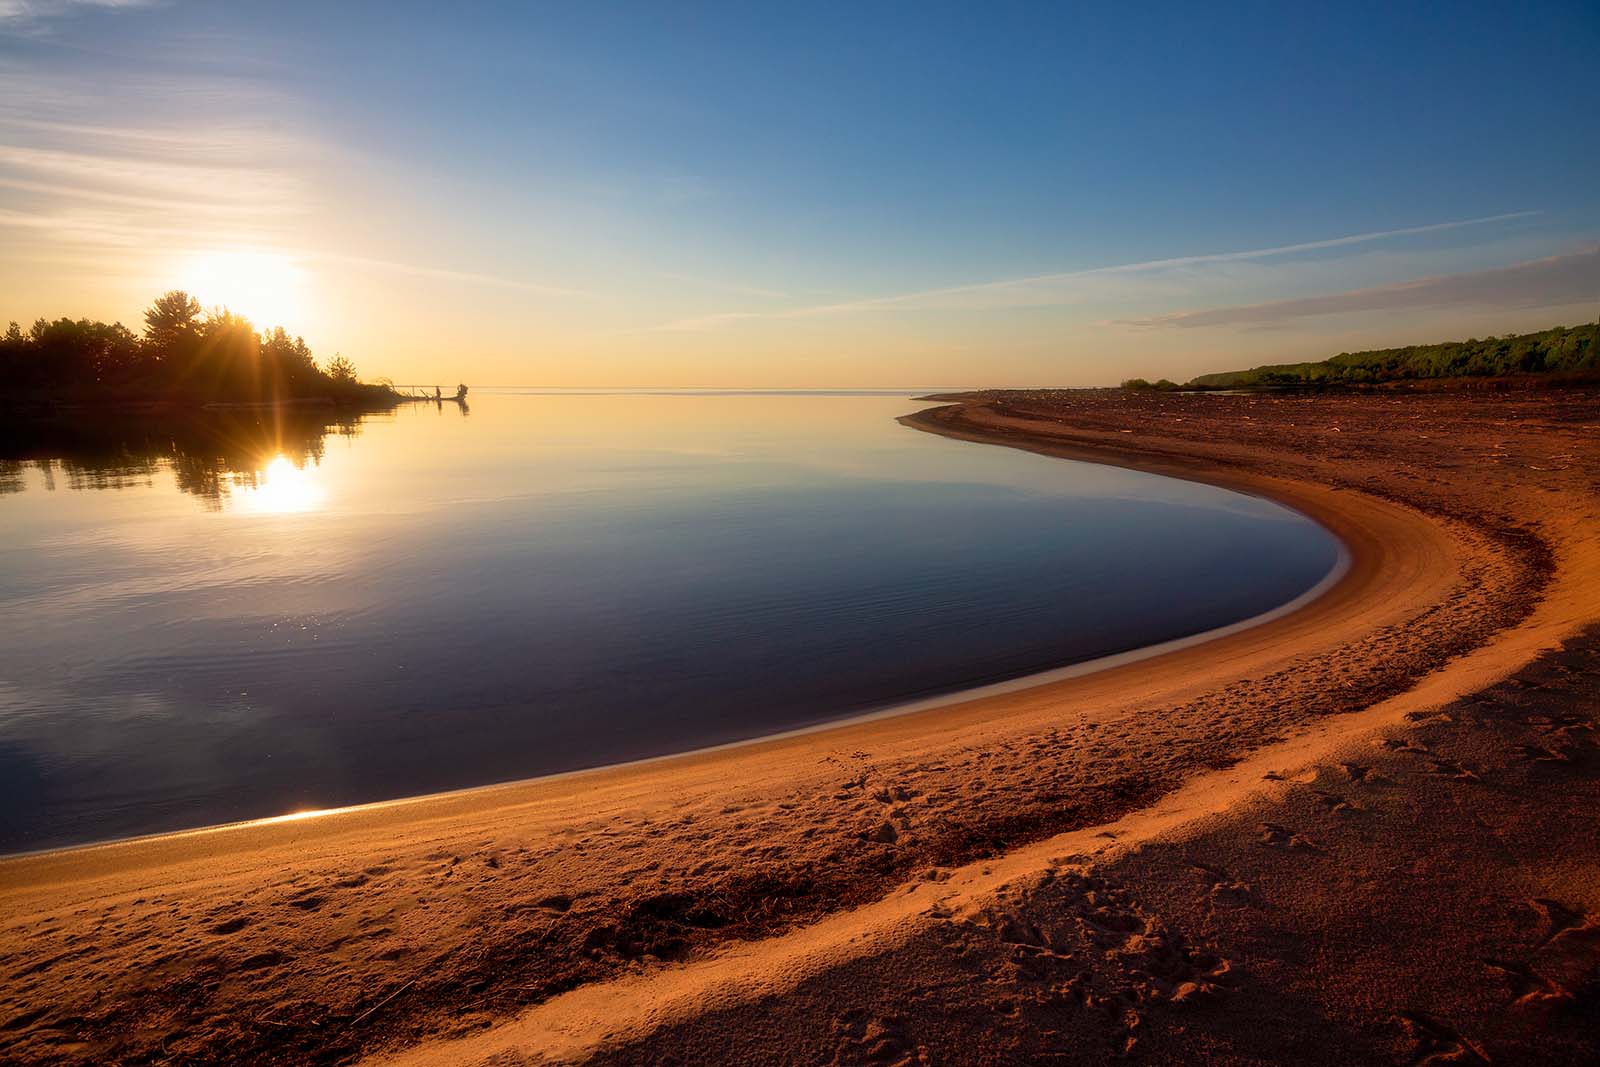 sunset at the outer island lagoon with sandy beach in the apostle islands national lakeshore